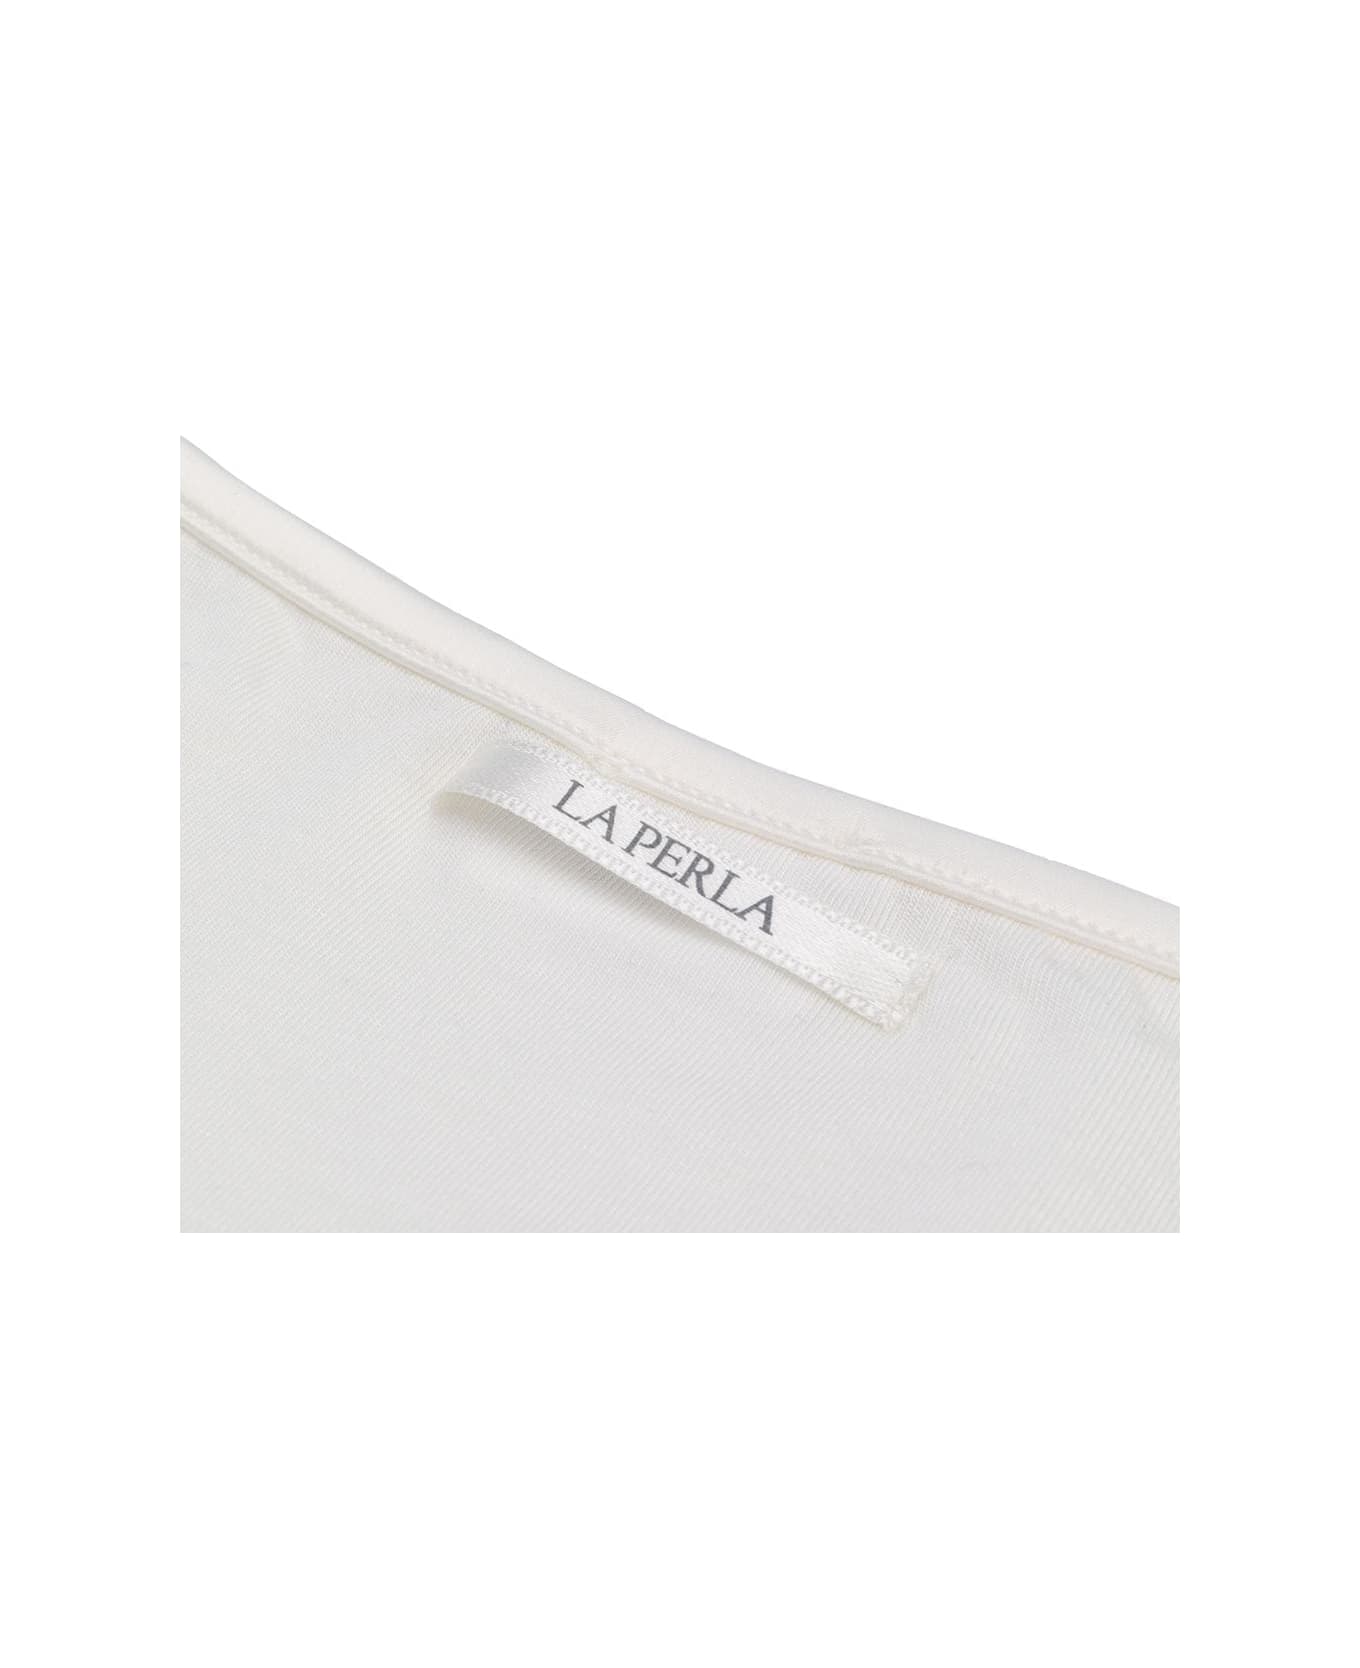 La Perla Baby Girl Briefs With Logo - White アクセサリー＆ギフト